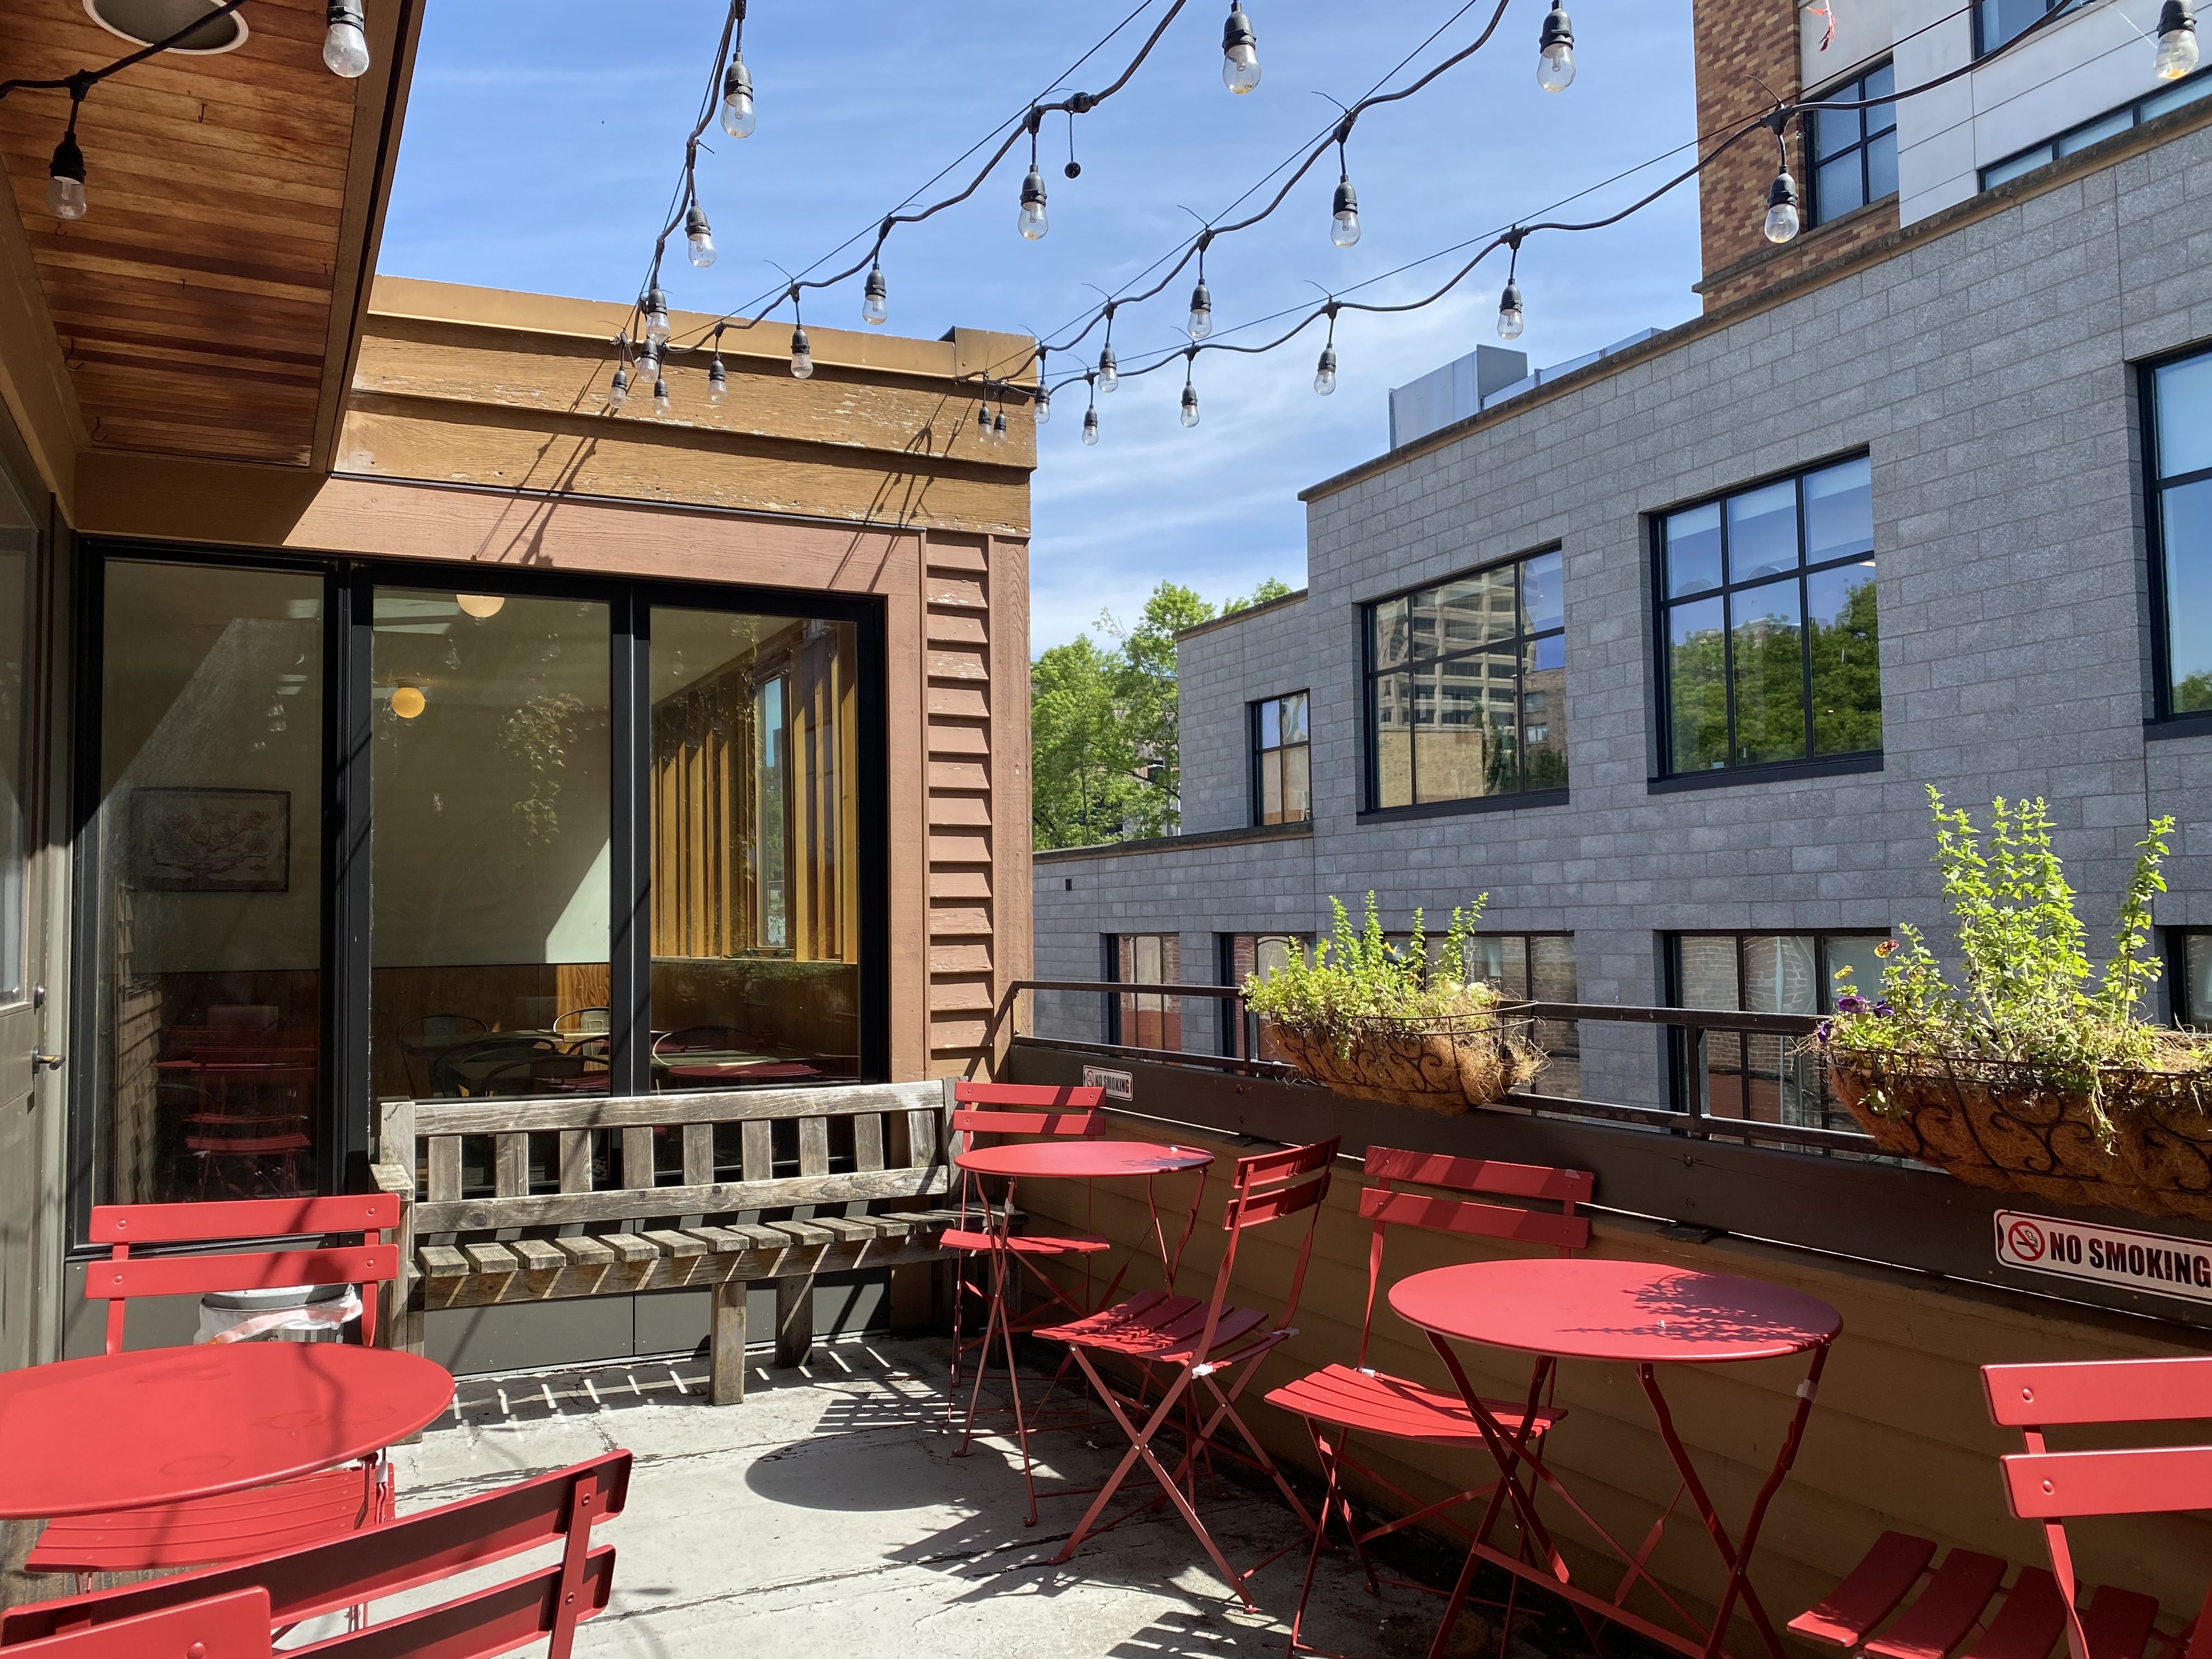 Red cafe tables on a deck with a building across an alley and a glass sliding door to reenter the cafe.